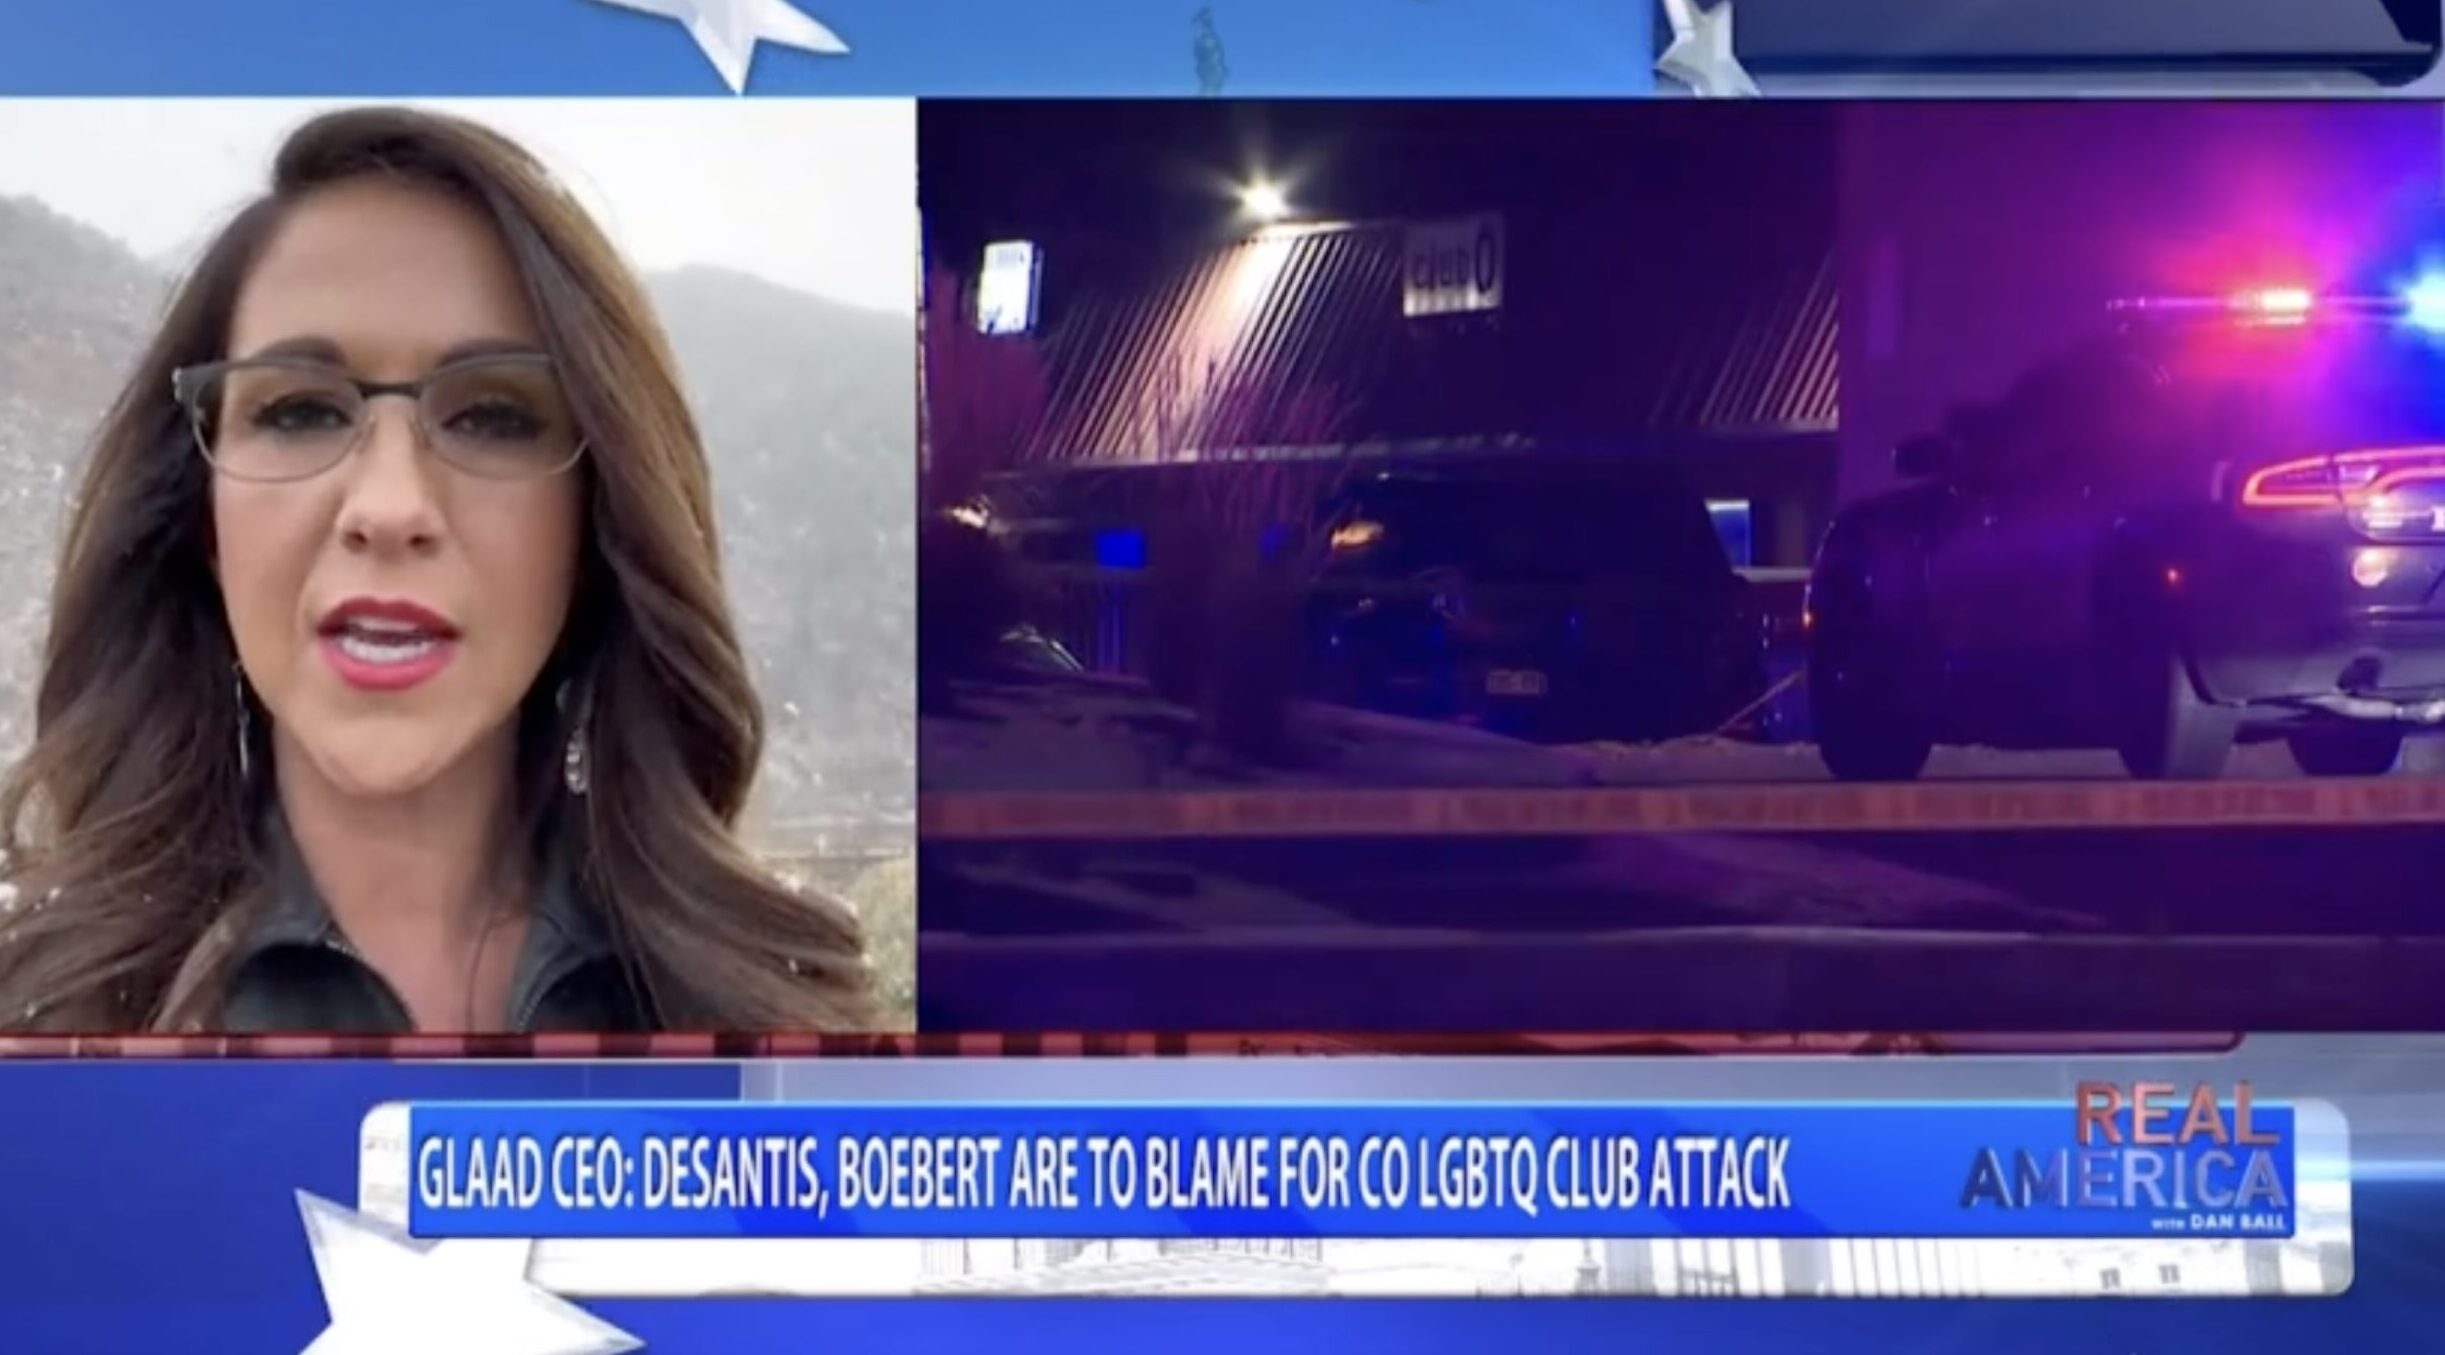 Lauren Boebert Throws Pity Party Over Criticism She’s Gotten in Wake of Colorado Nightclub Shooting: ‘The Left is Pissed I Won’ (mediaite.com)